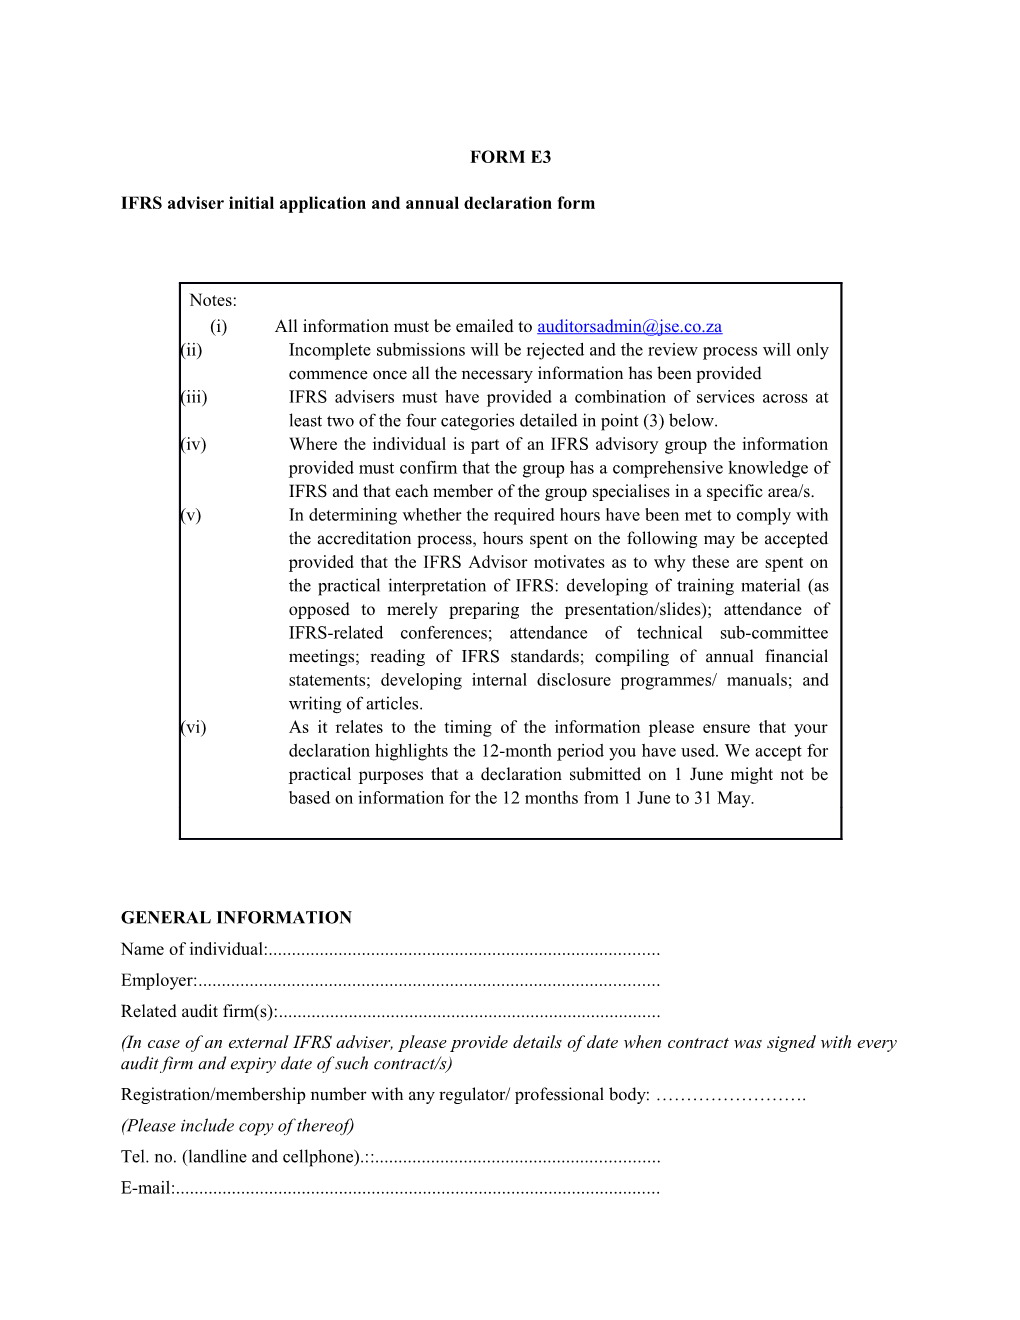 IFRS Adviser Initial Application and Annual Declaration Form